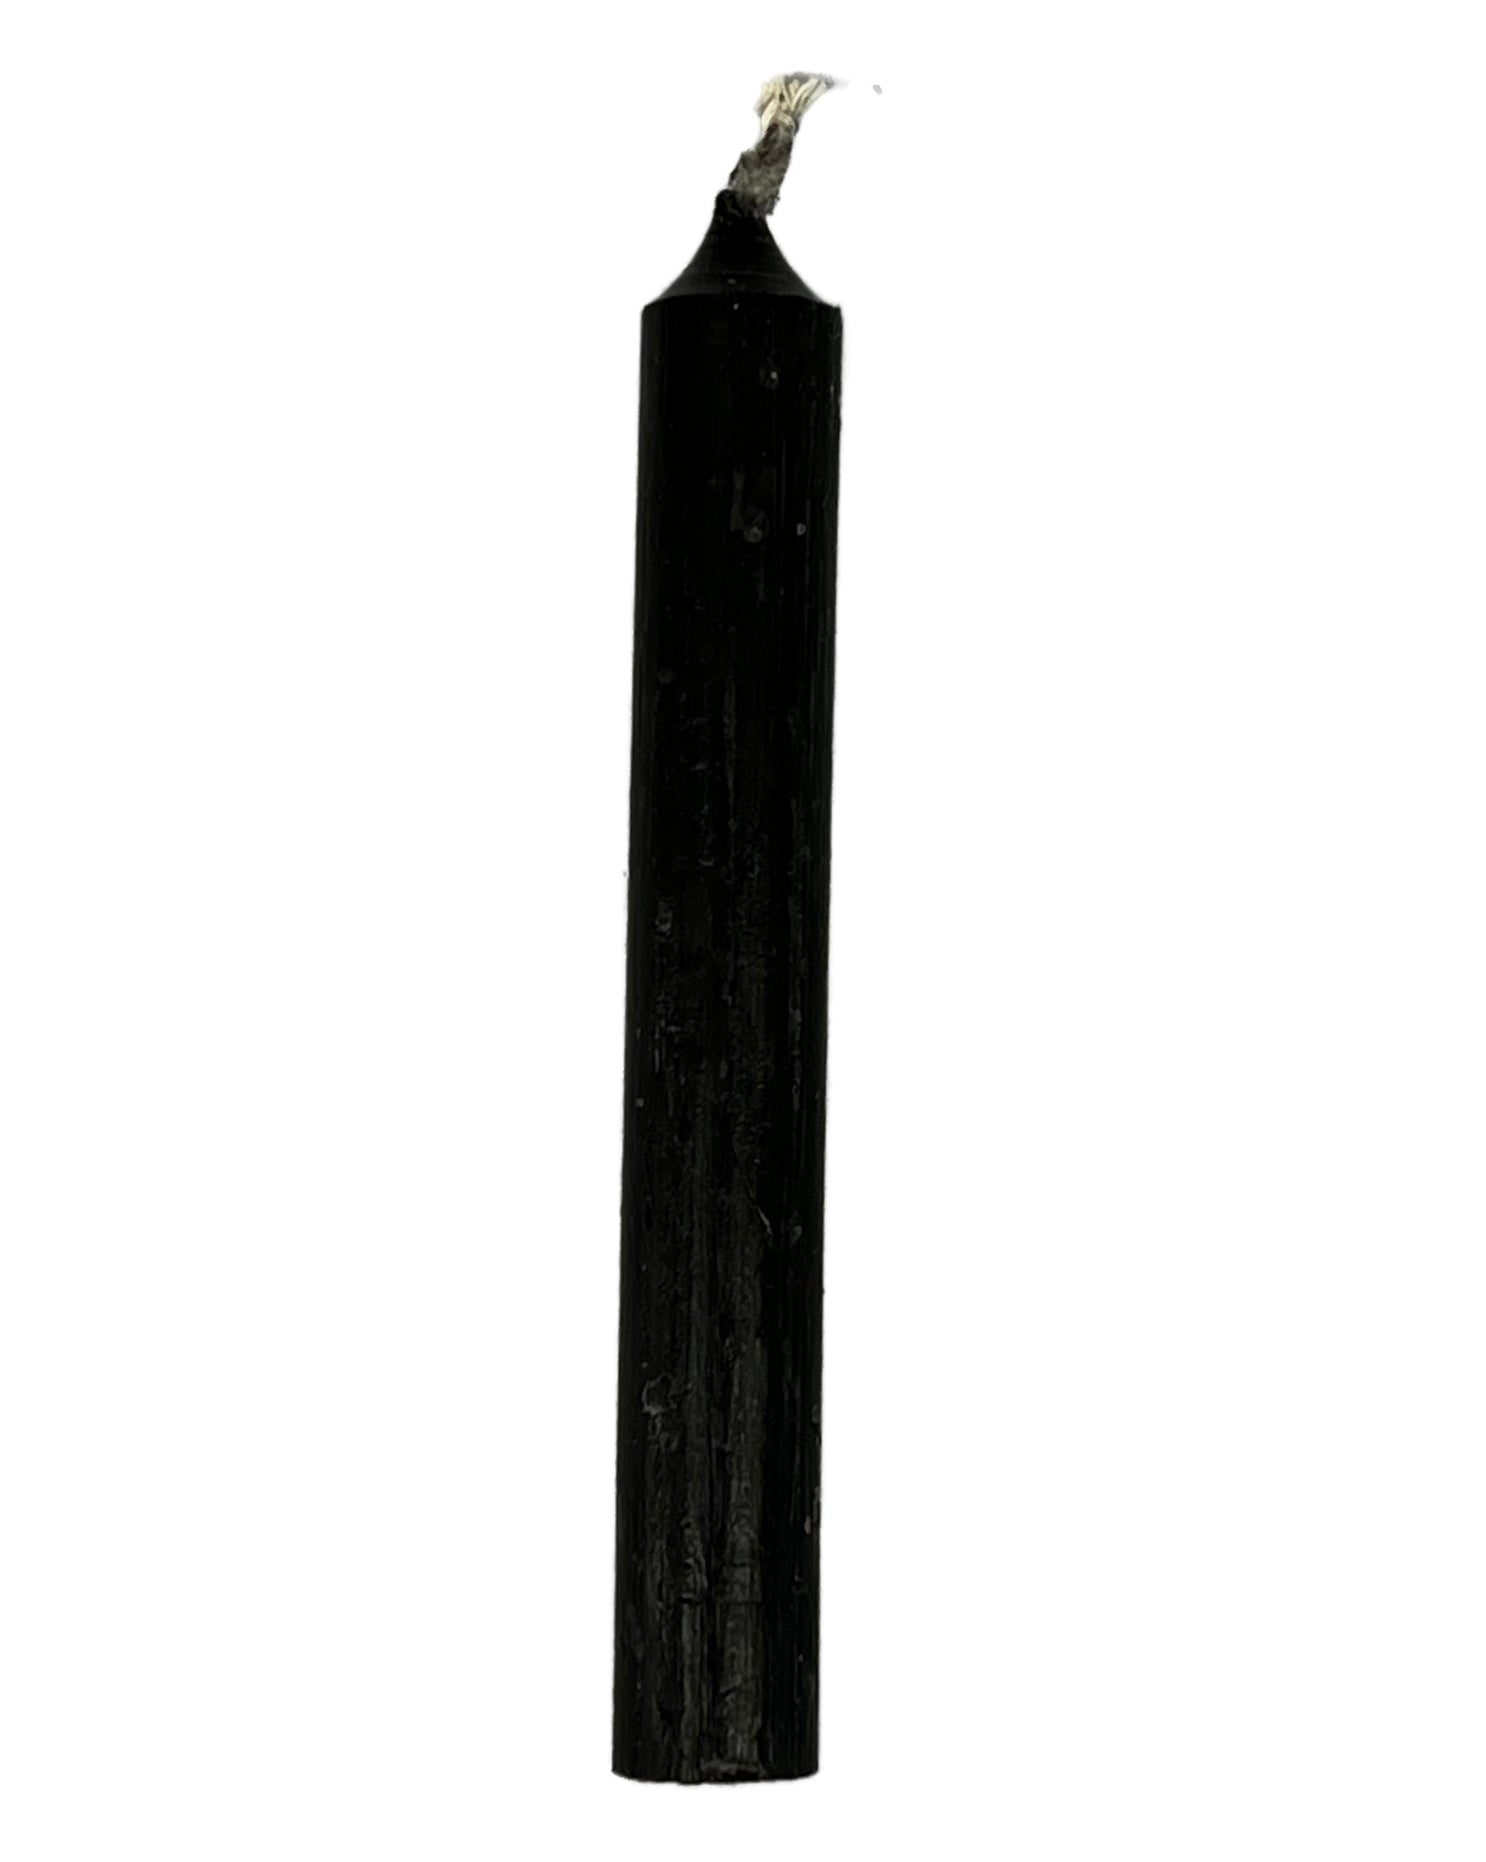 3" tall black chime candle 